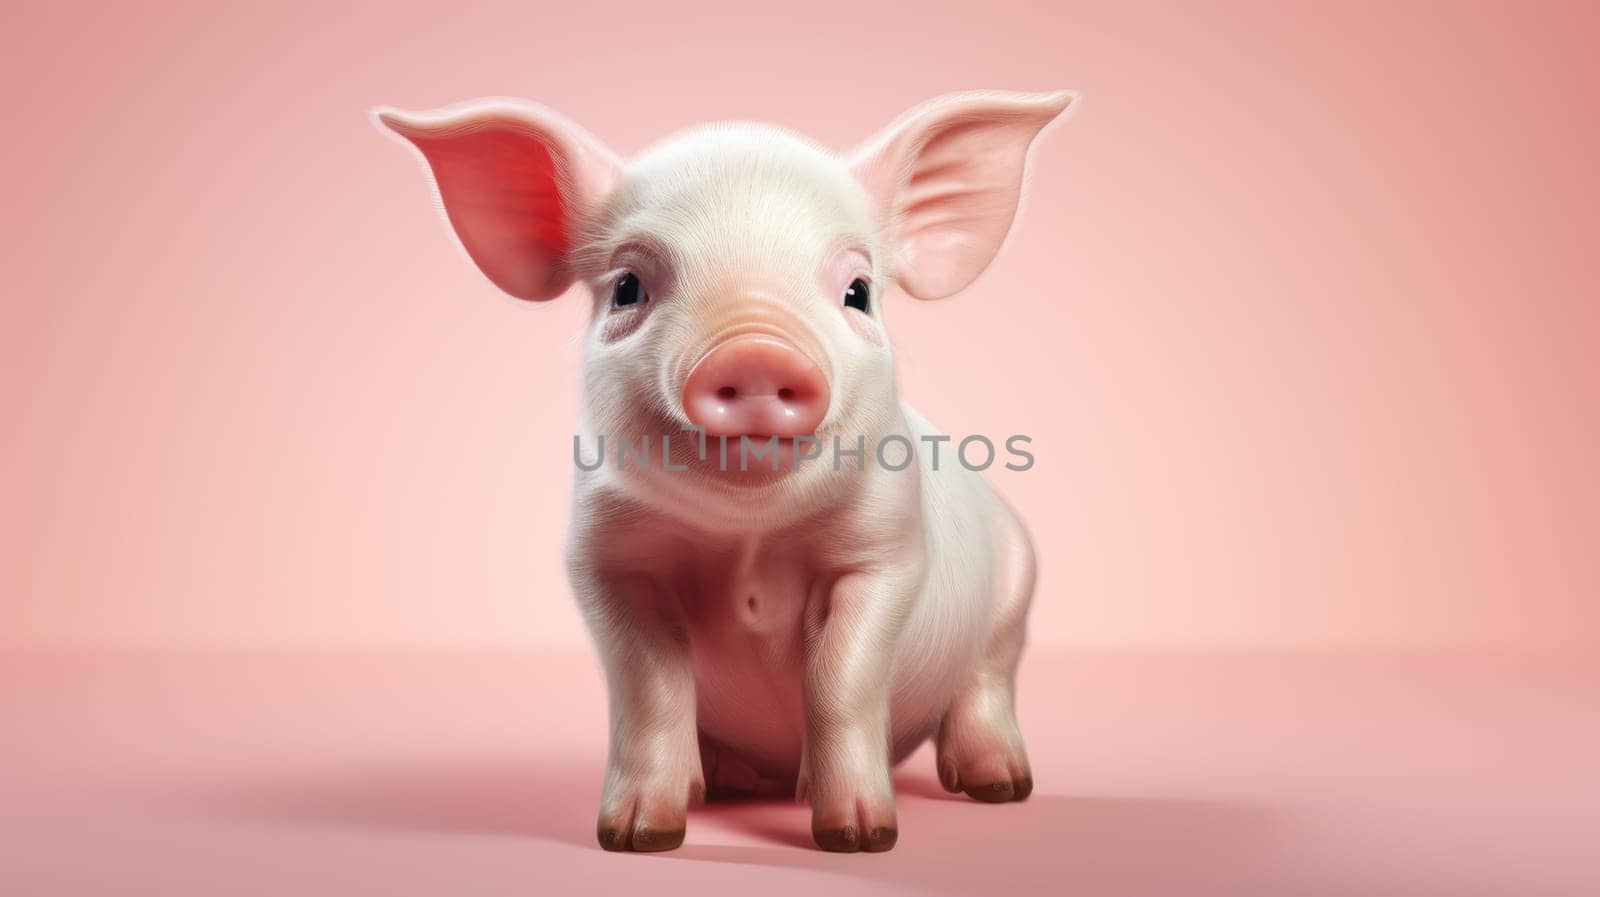 An adorable baby piglet sitting on white clouds with rainbow on blue sky background, showcasing its innocence and charm. by JuliaDorian